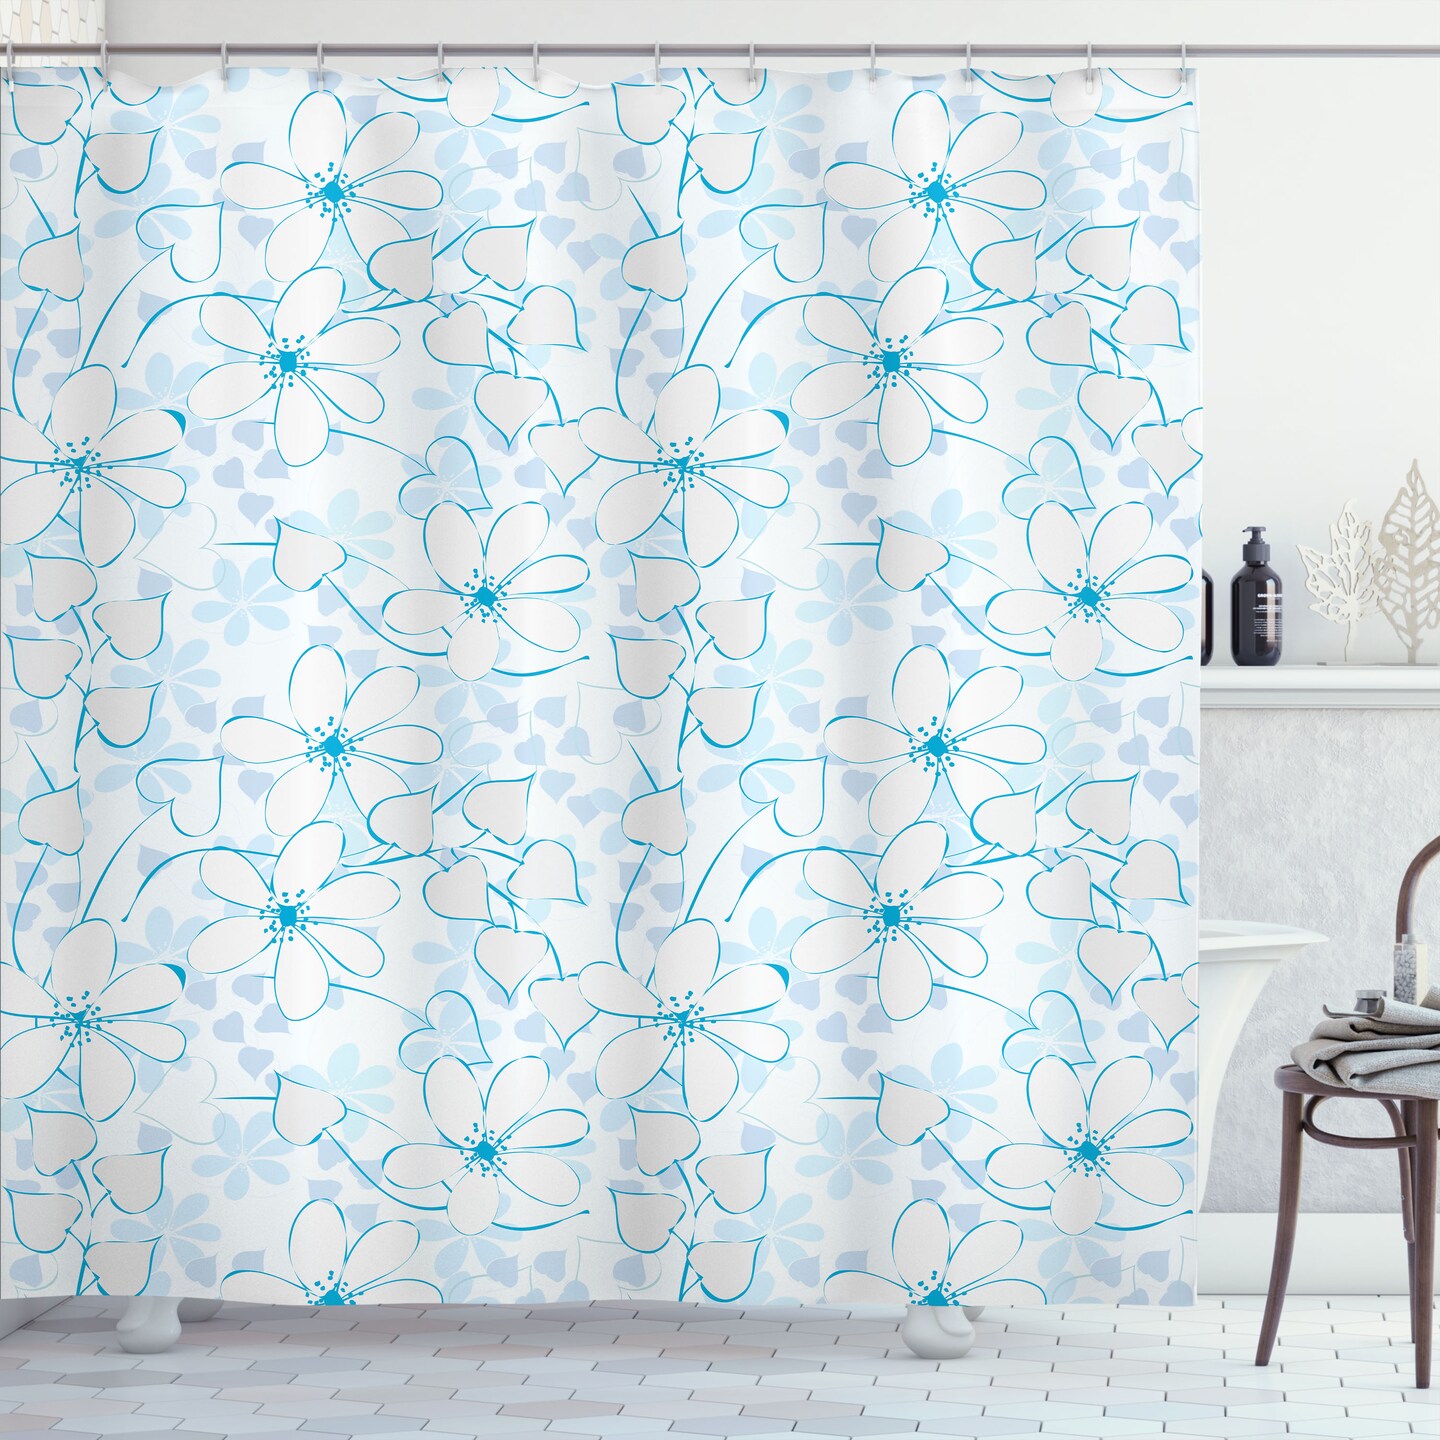 Ambesonne Blue Shower Curtain, Abstract Flowers with Heart Shaped Leaves  Romantic Fresh Beauty in Nature, Cloth Fabric Bathroom Decor Set with Hooks,  69 W x 70 L, Pale Blue Aqua White